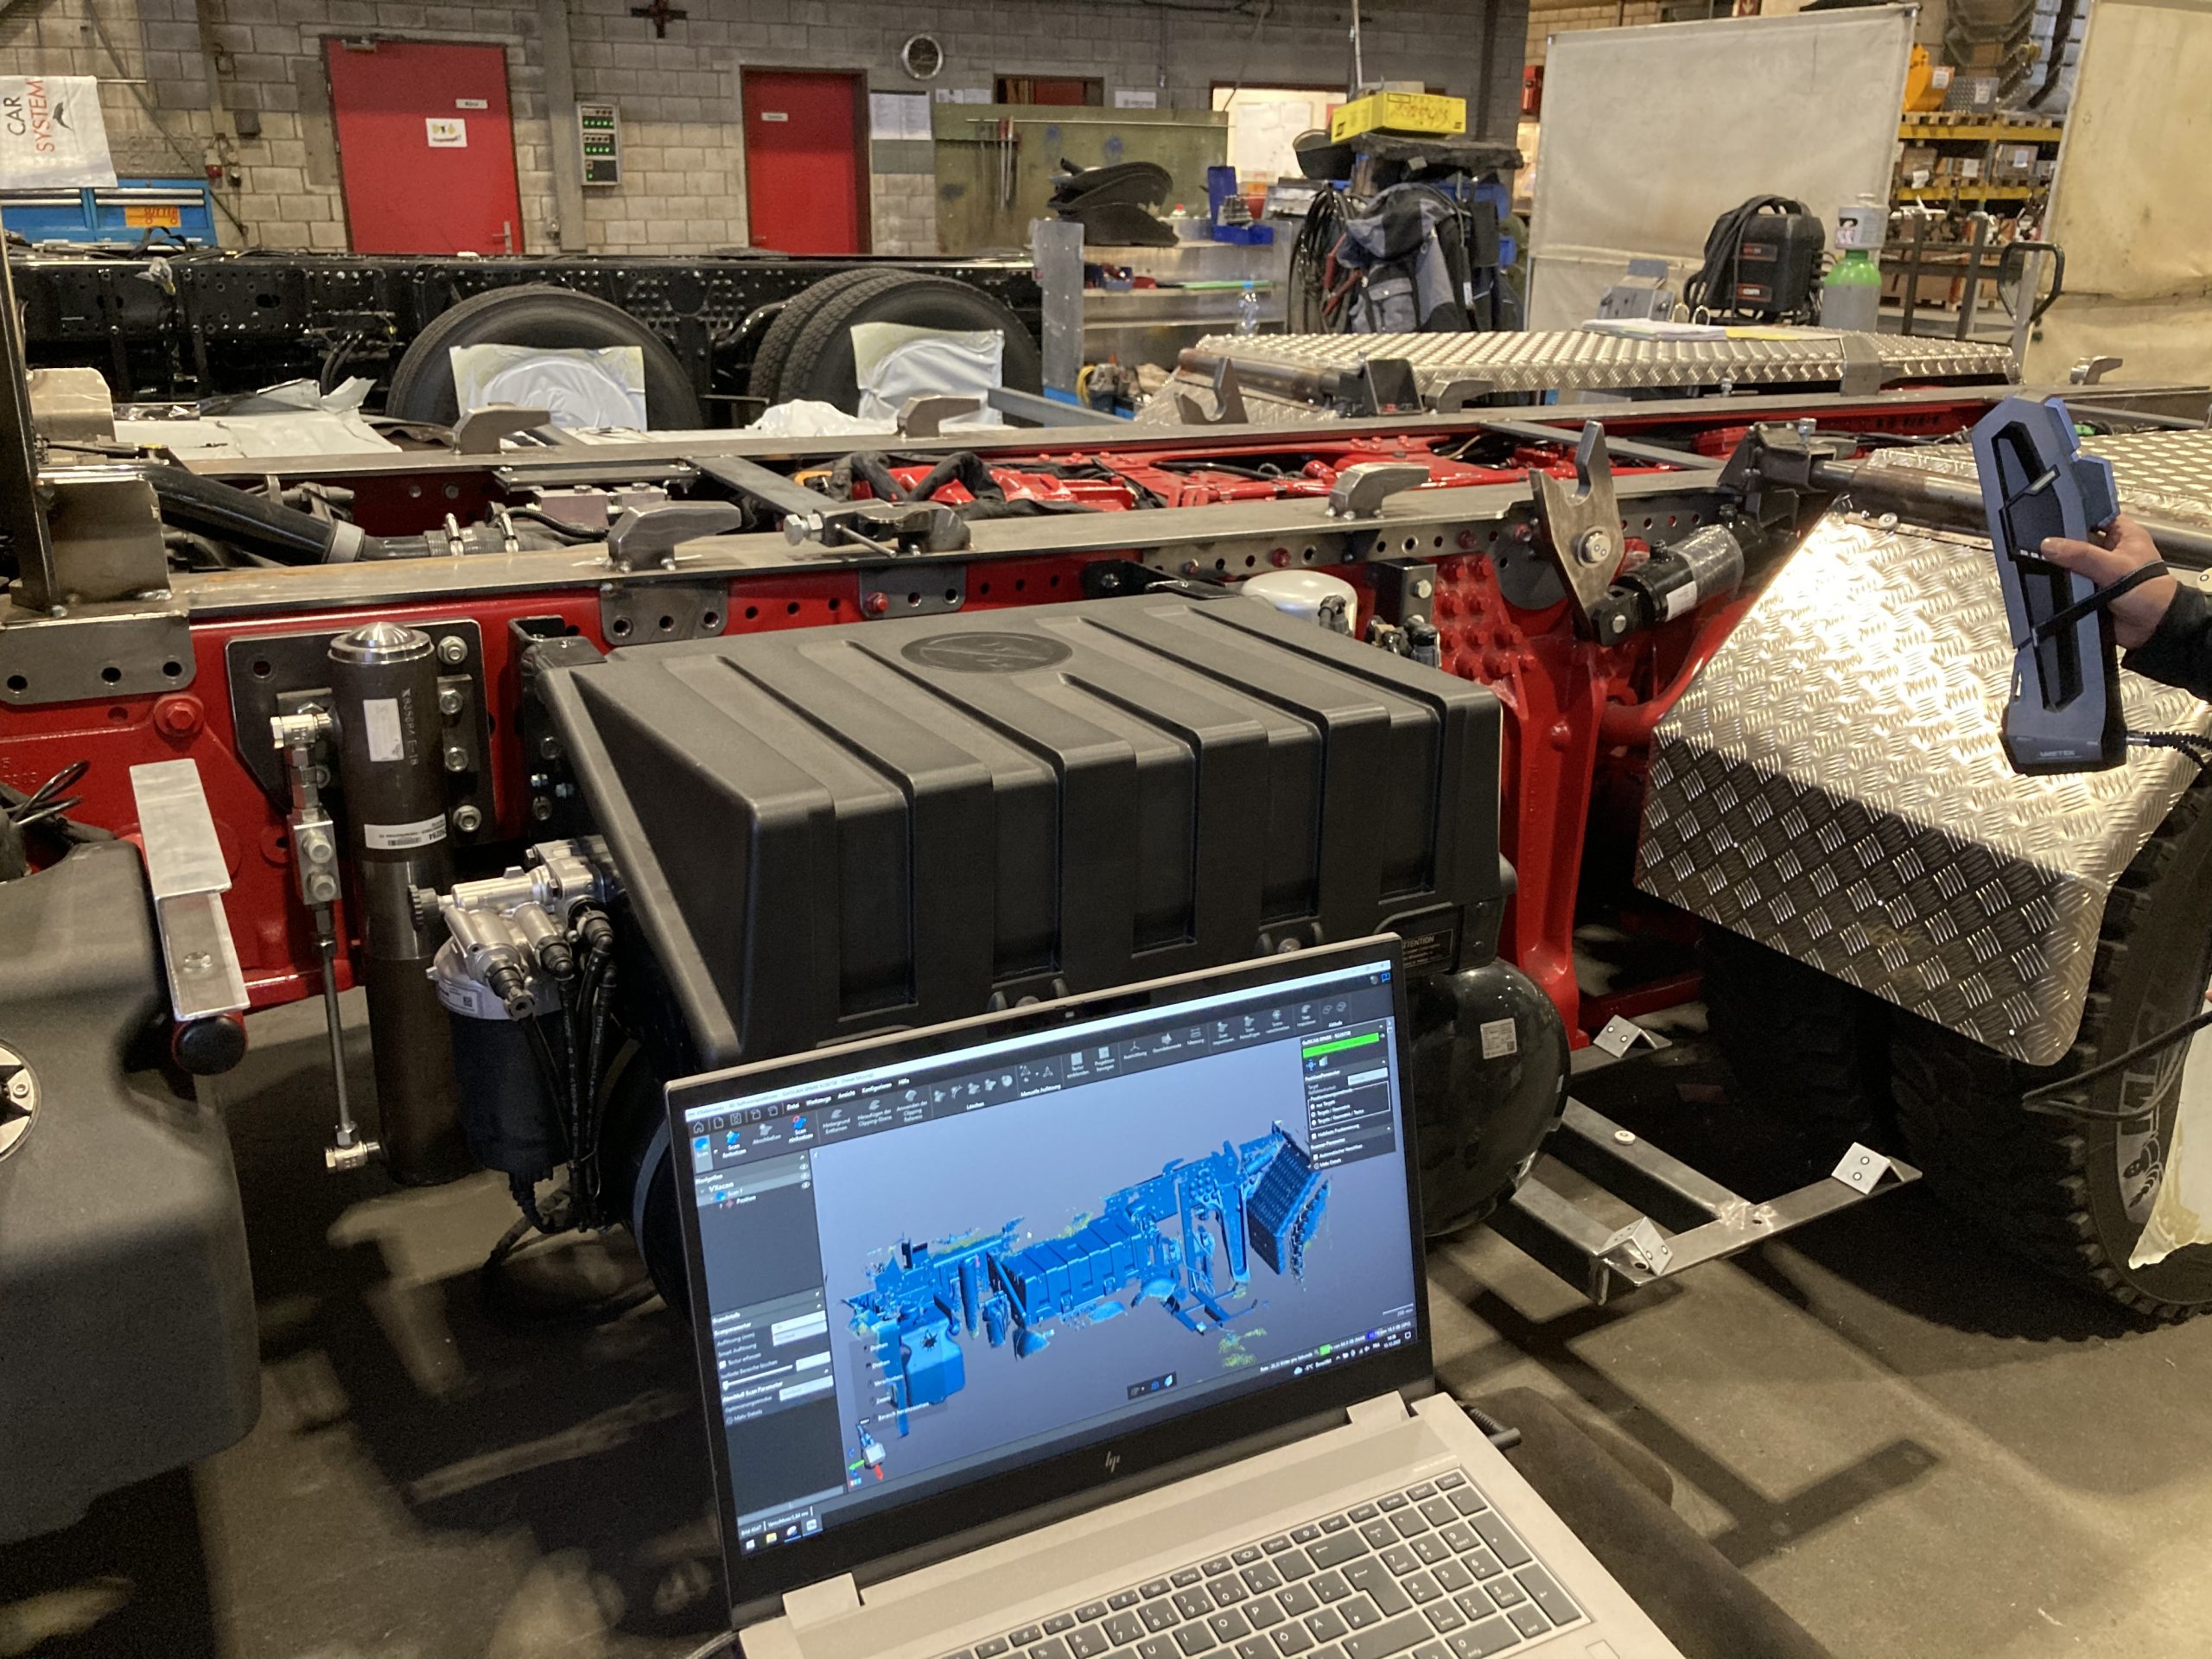 Vehicle manufacturing company uses 3D scanners to increase design quality and optimize engineering times